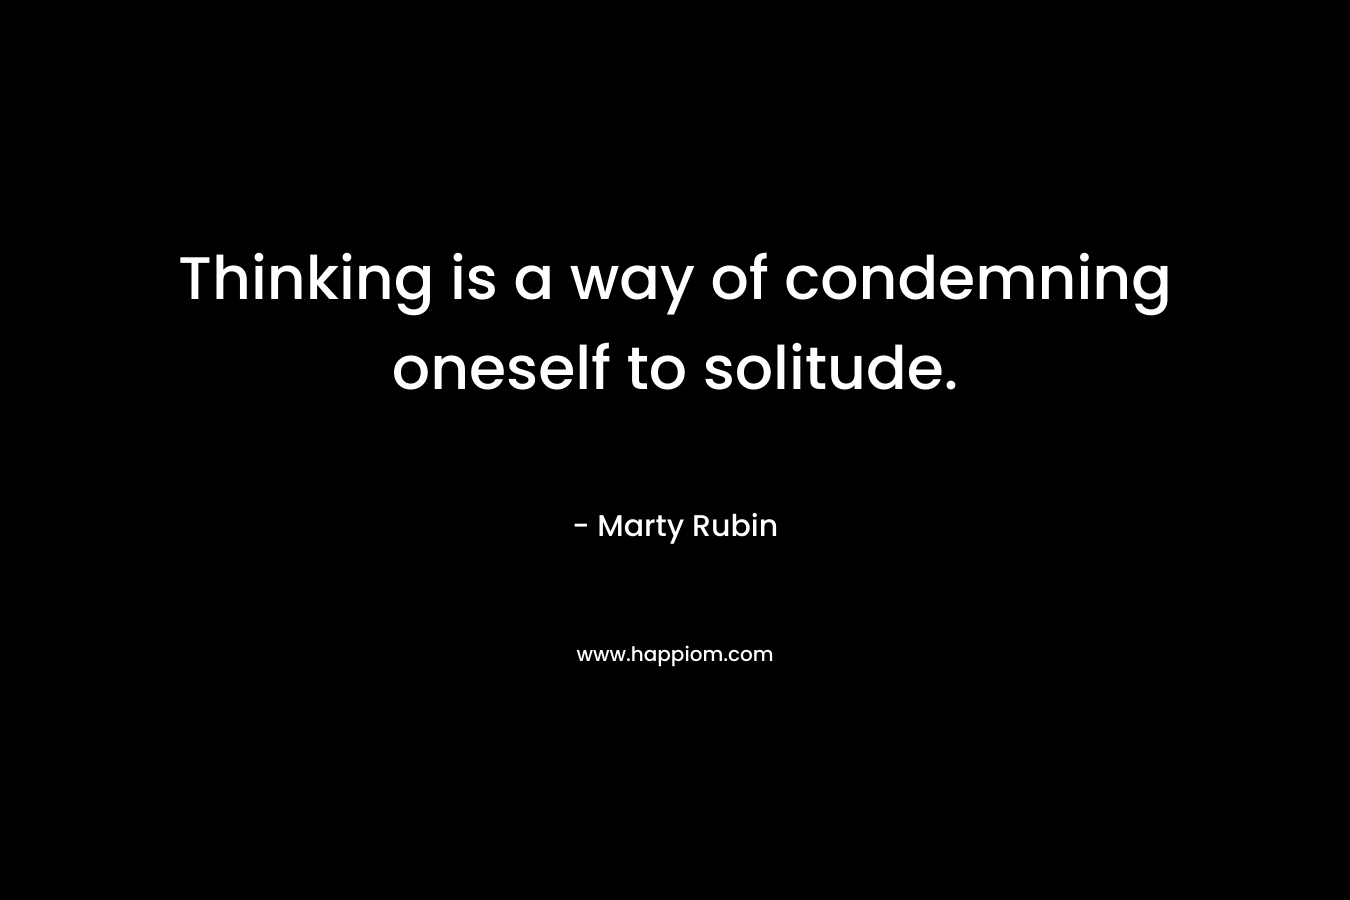 Thinking is a way of condemning oneself to solitude. – Marty Rubin